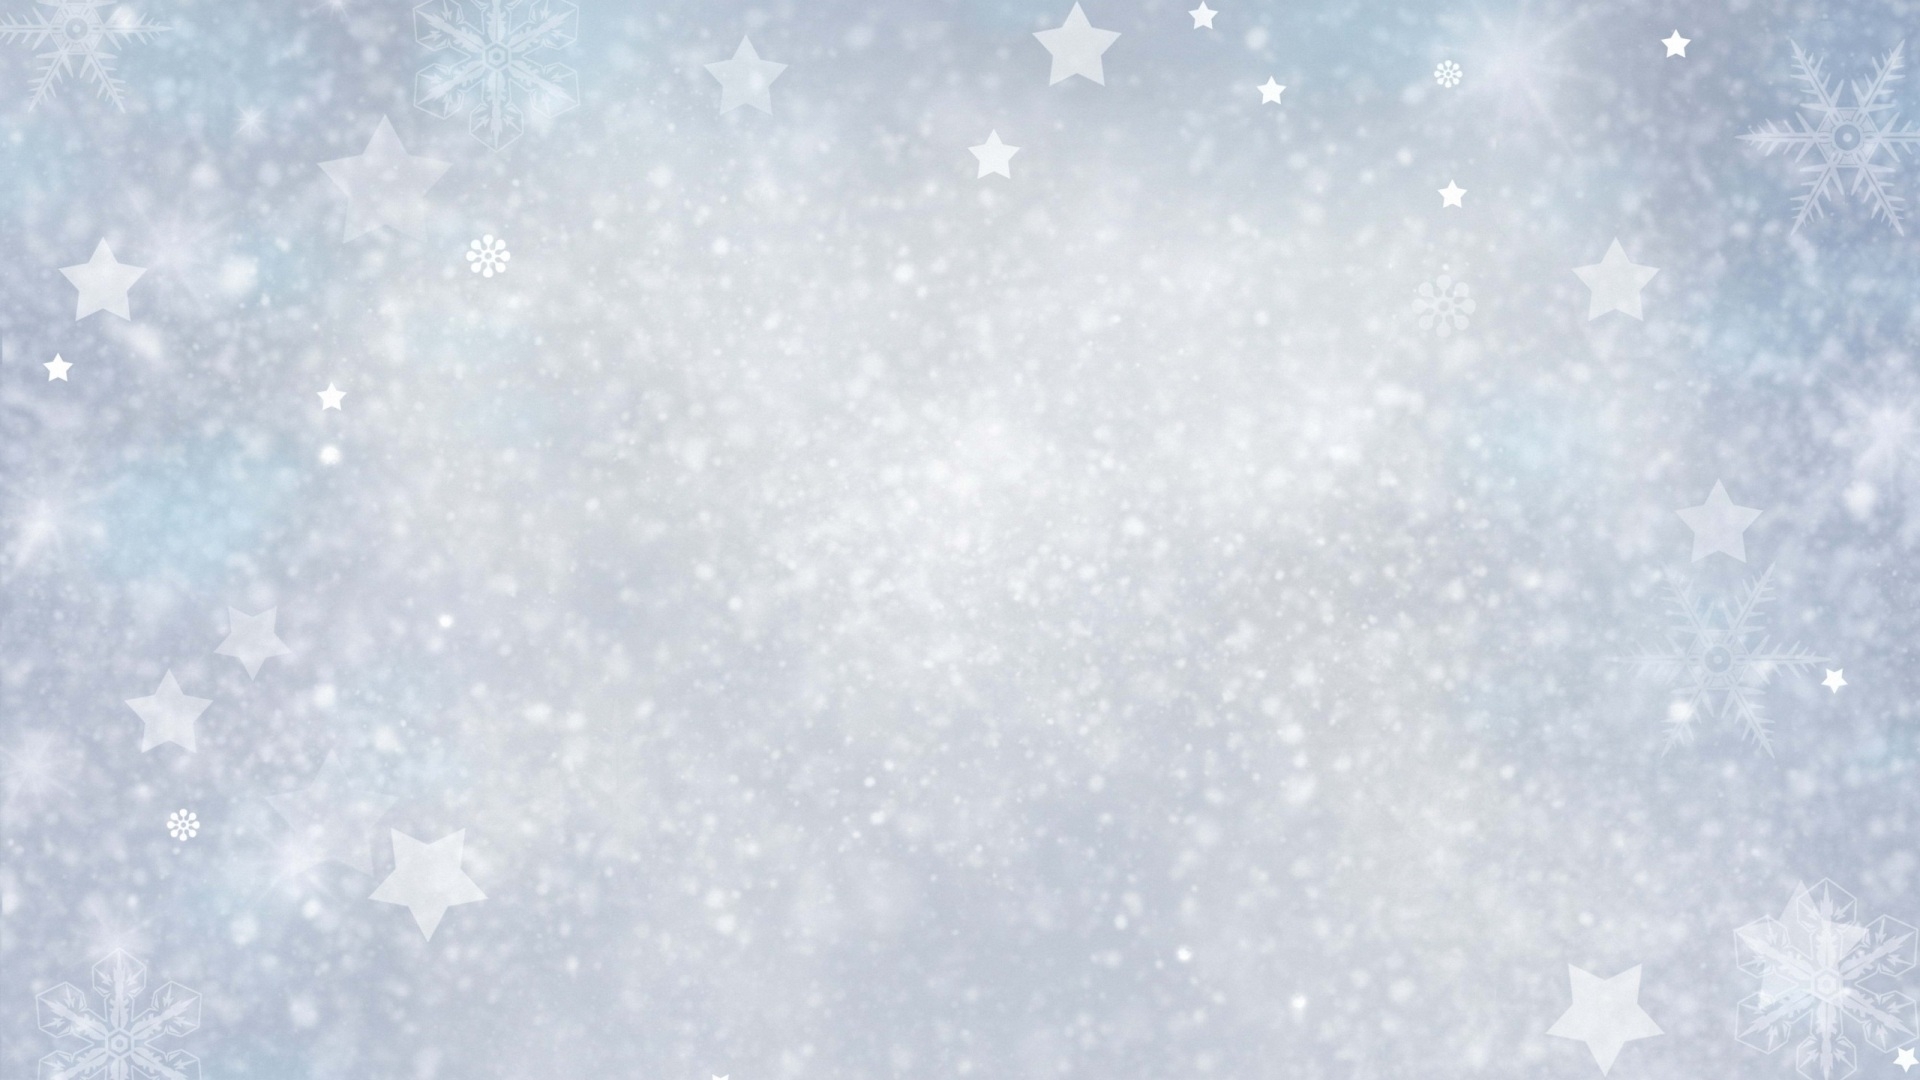 Related Pictures Xmas Snowflake Background Wallpaperwallpaper